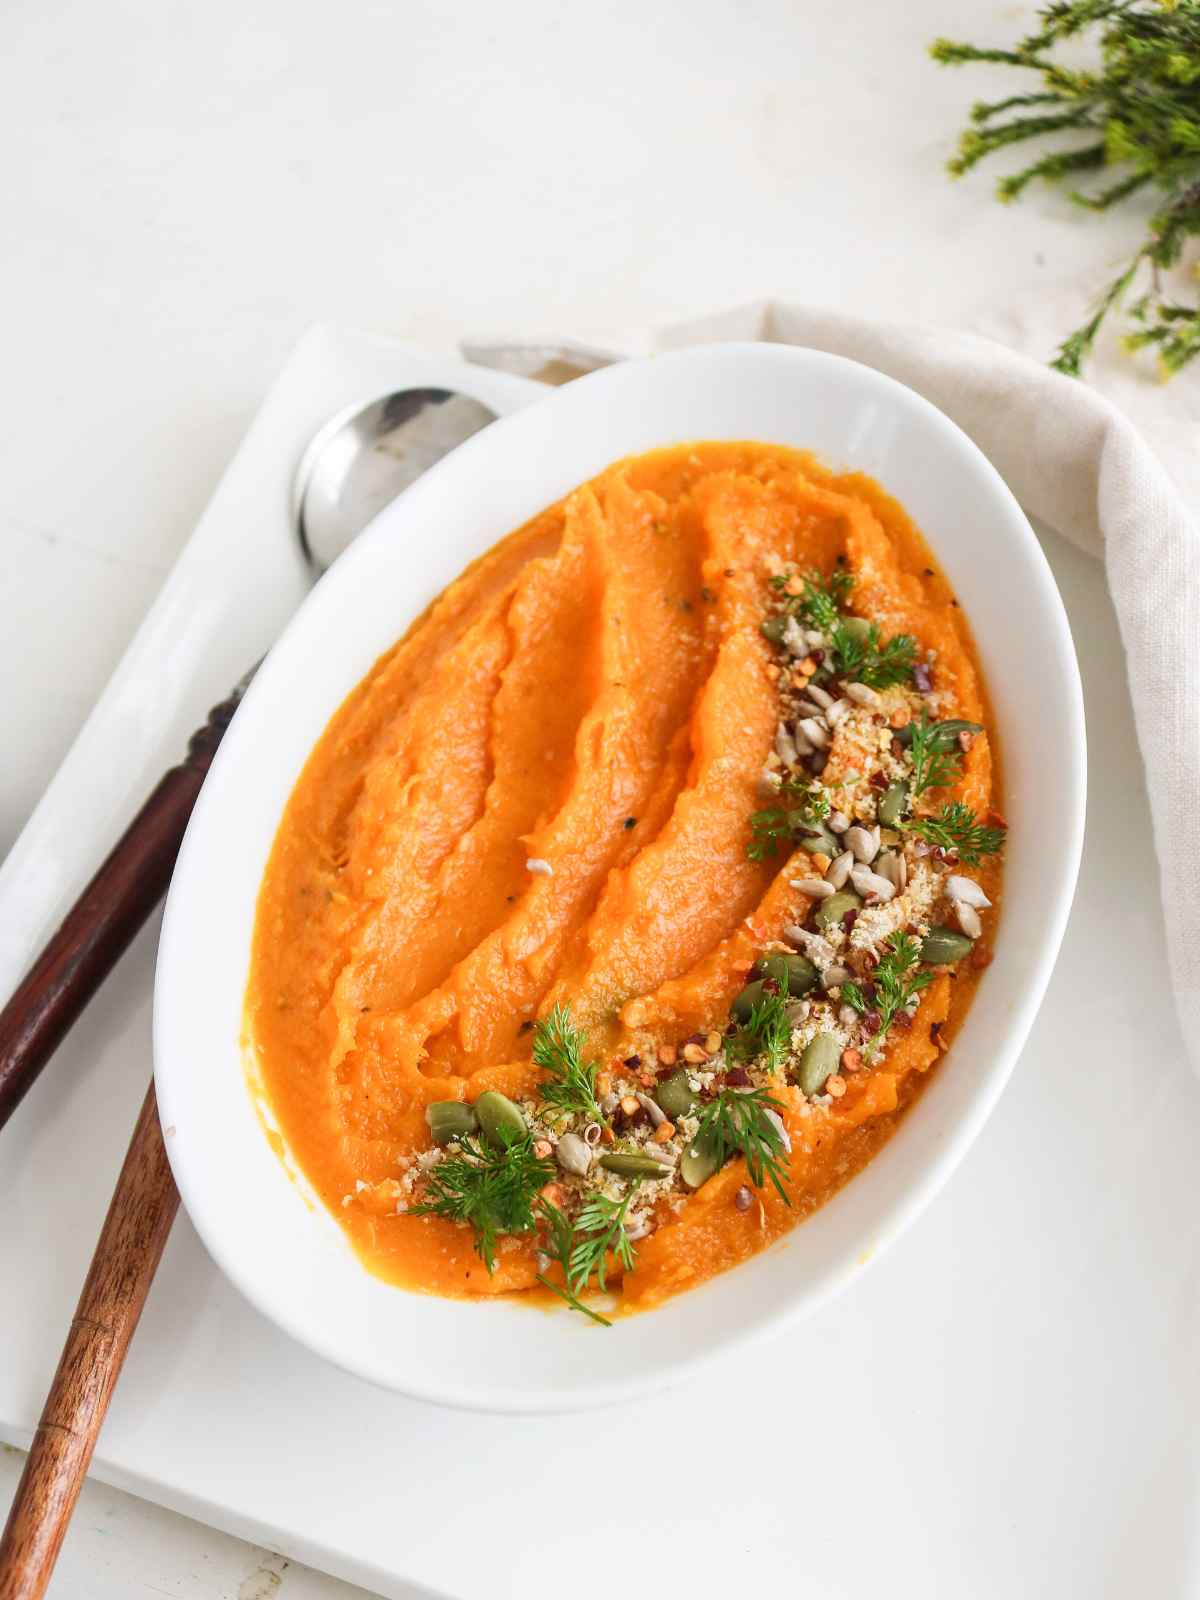 Orange color butternut squash mash served in a white dish garnish with fresh green herbs and seeds.